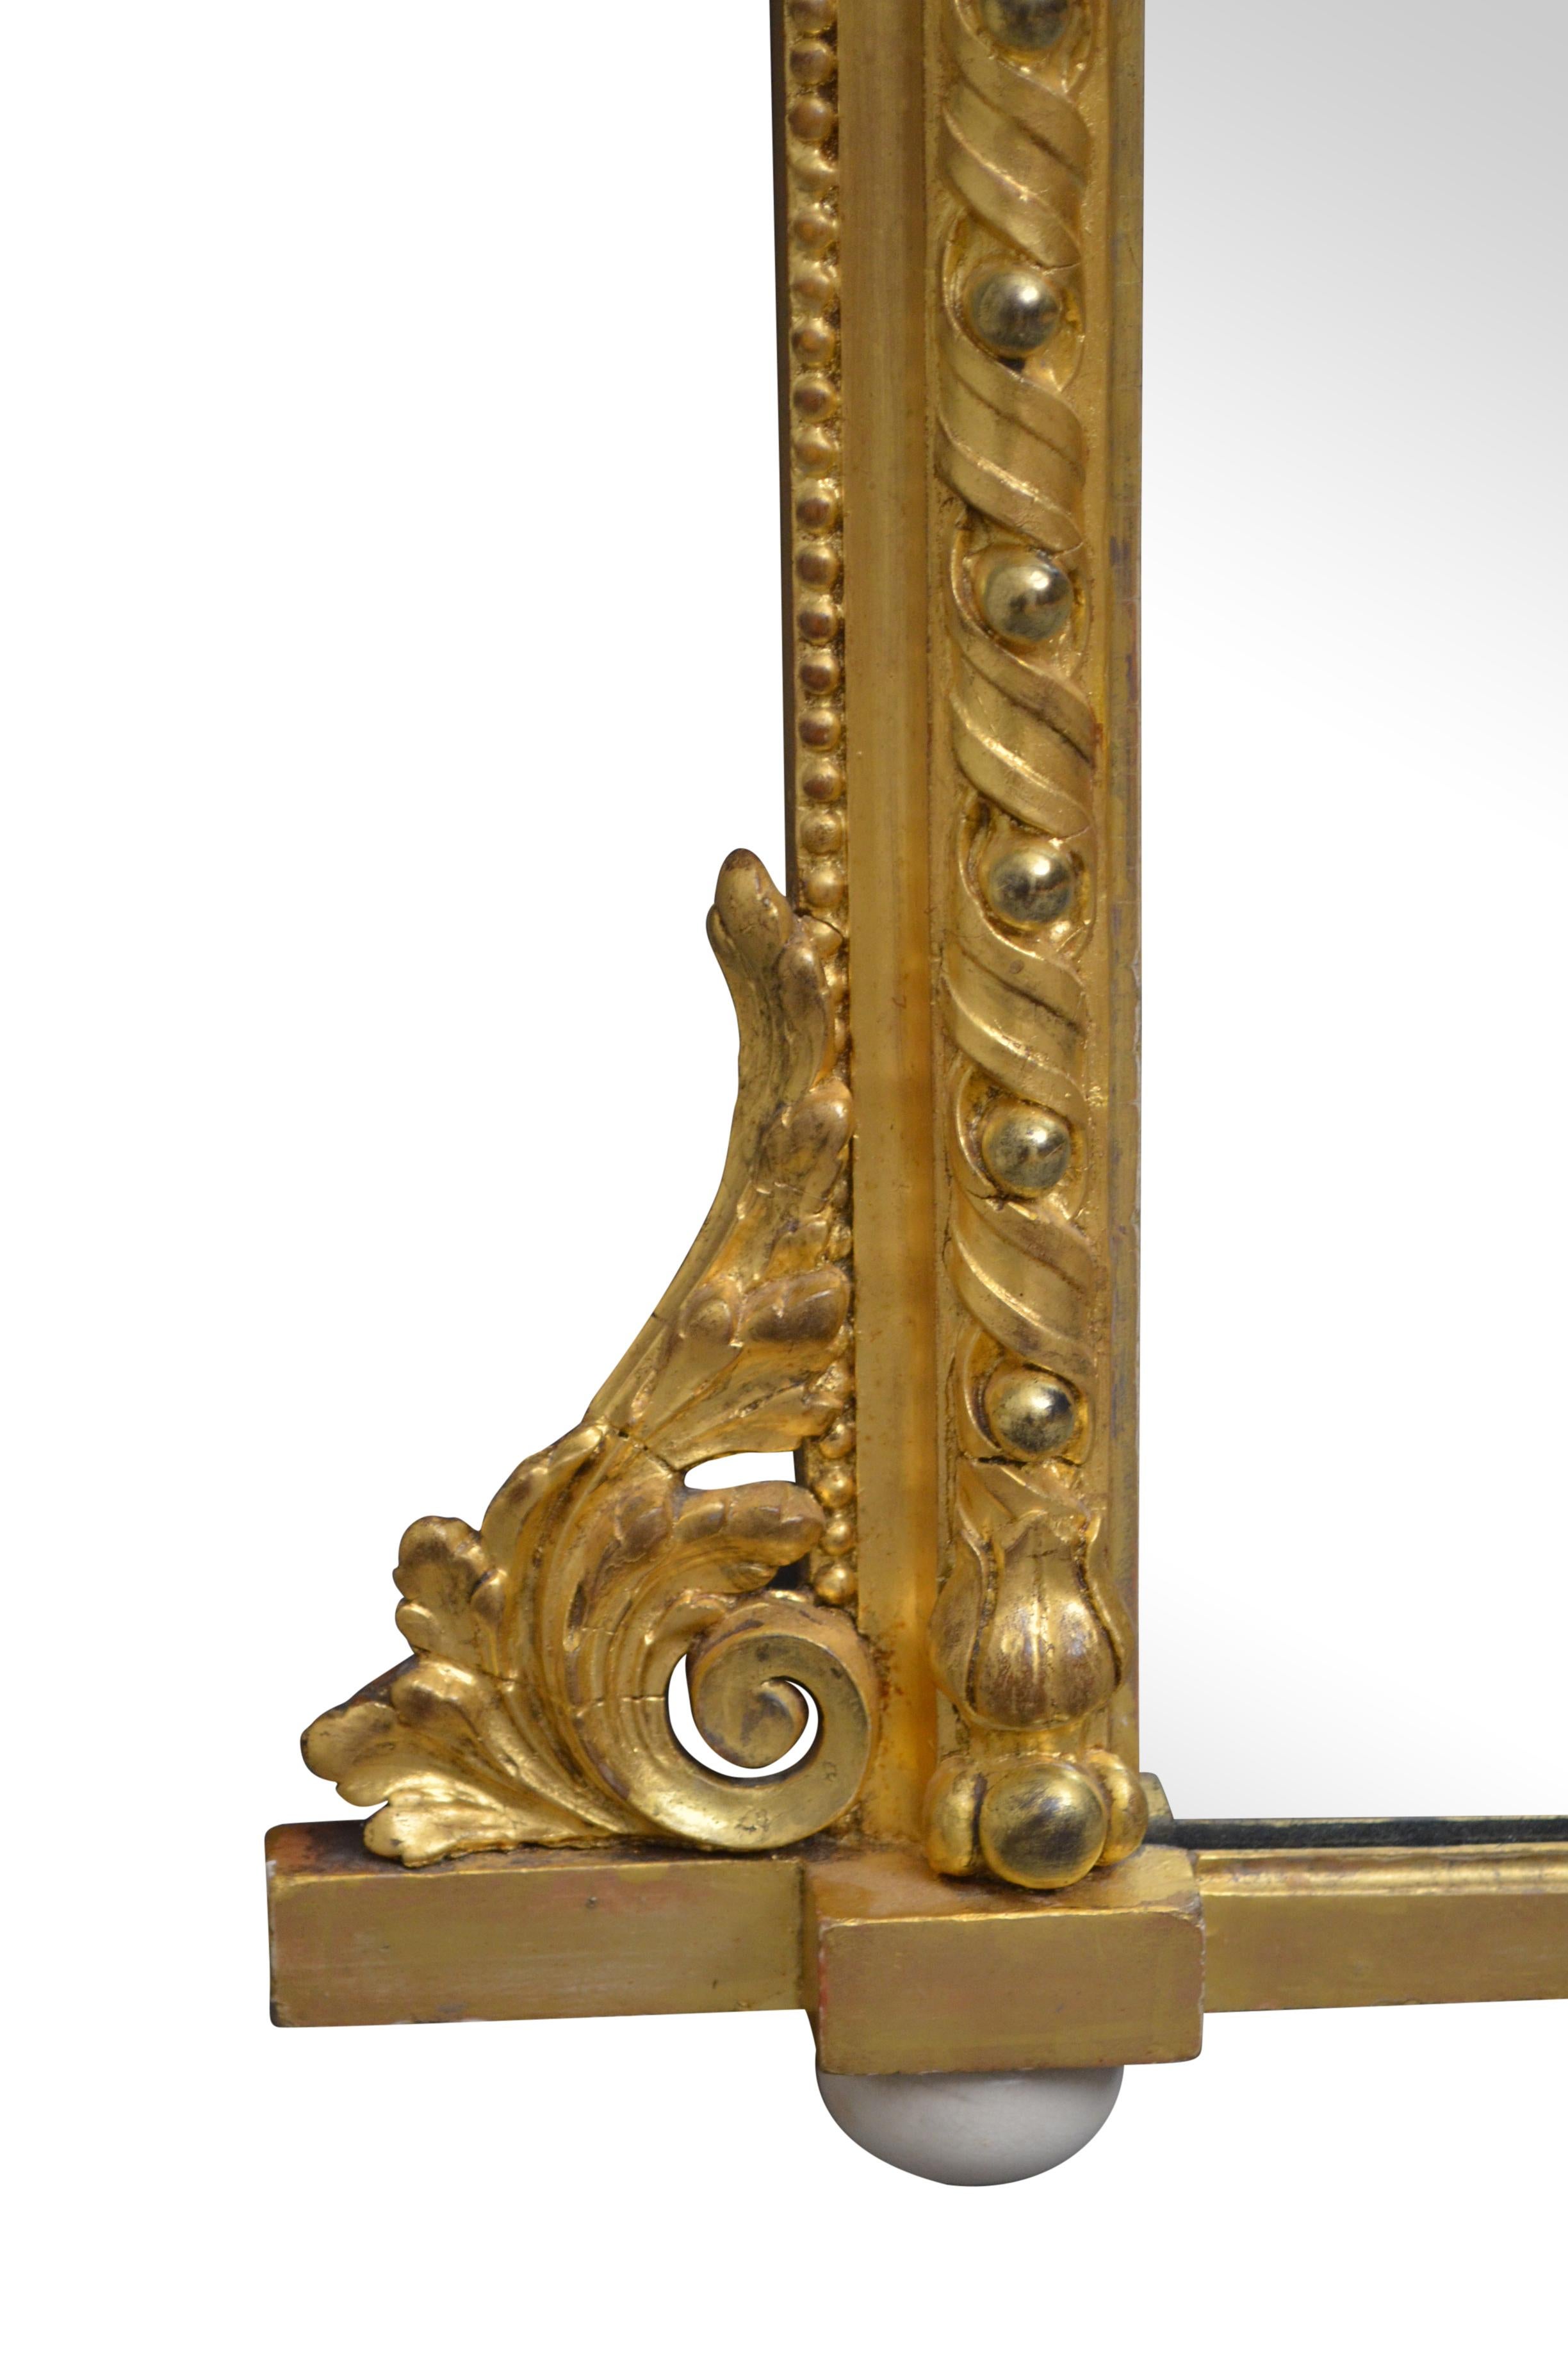 K0355 Fine Victorian wall mirror of horizontal form, having original mirror plate with foxing in gilded frame. All in wonderful home ready condition. Ready to place at home. C1890
Measures: H 32.5” W 42.5”-frame W 50”-max D2.5”
H 83cm W 108